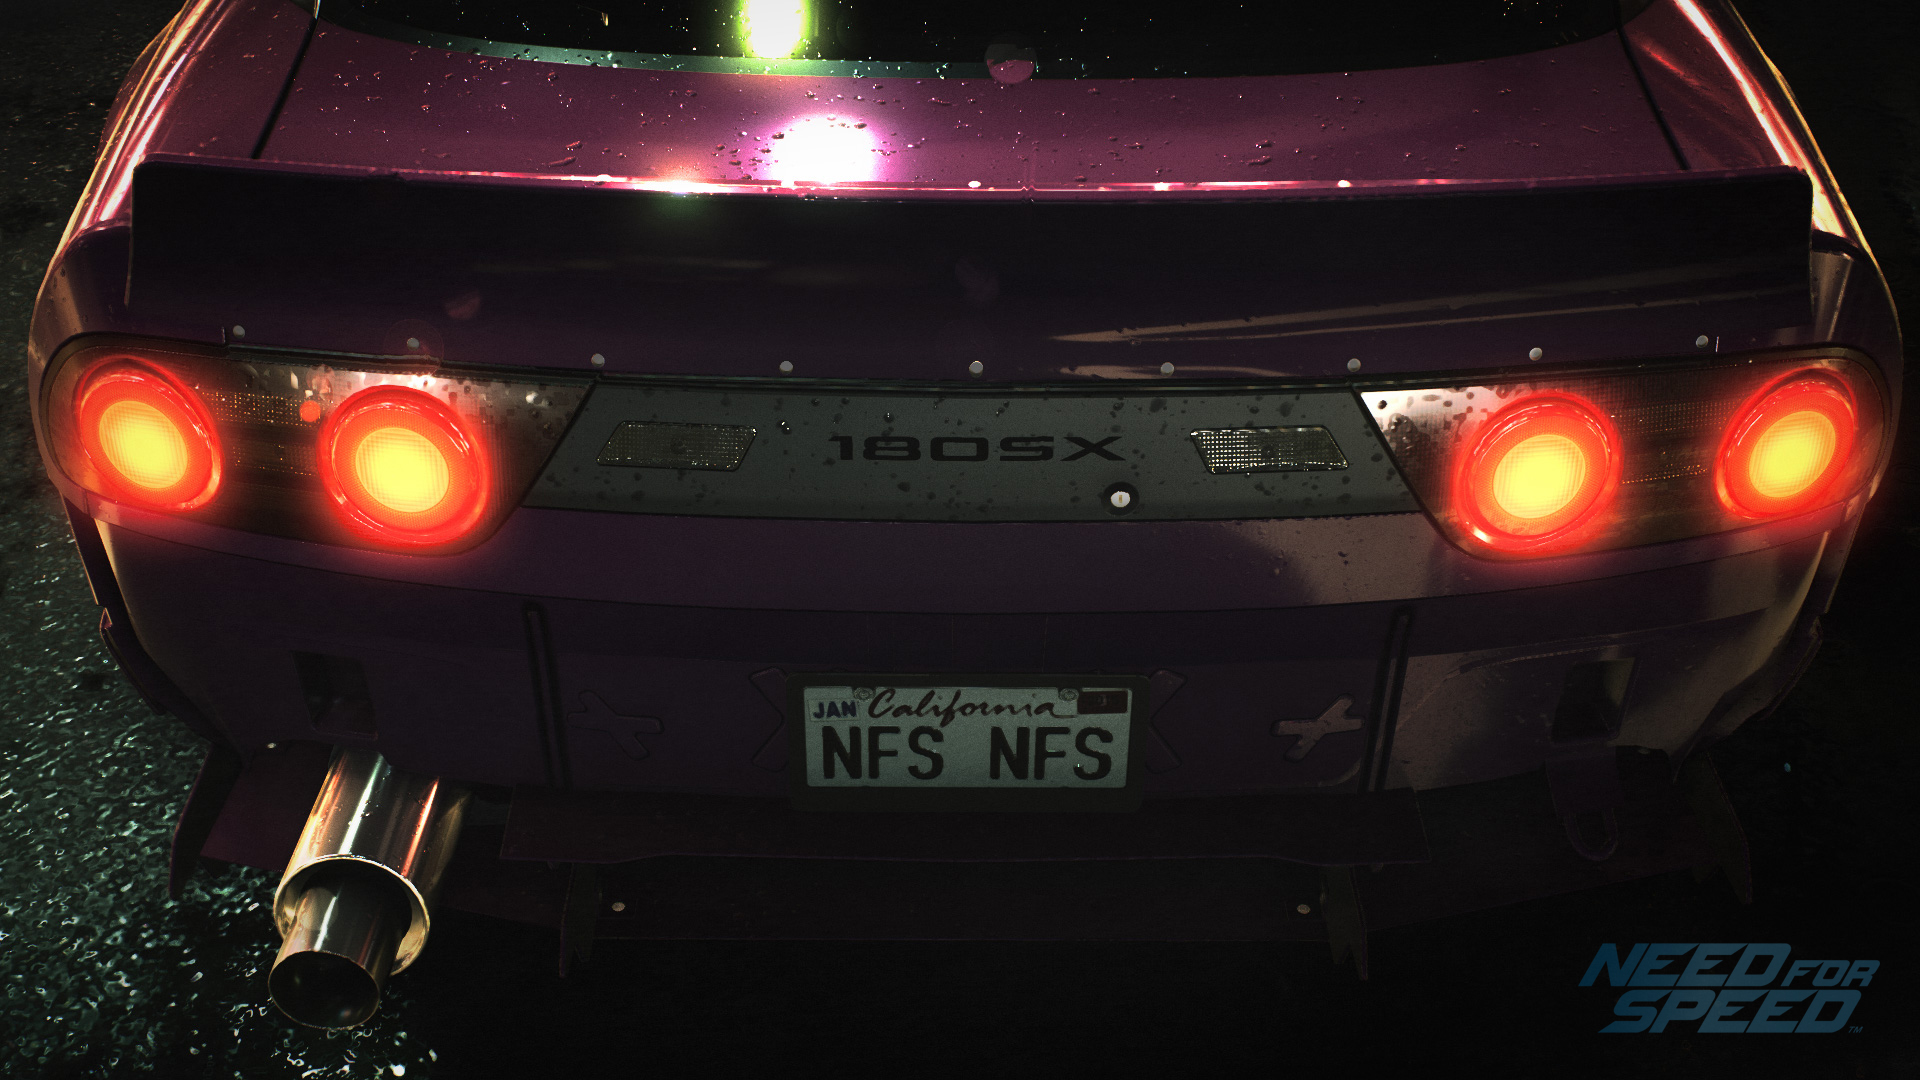 EA Releases Need For Speed Franchise Reboot With New Teaser Trailer